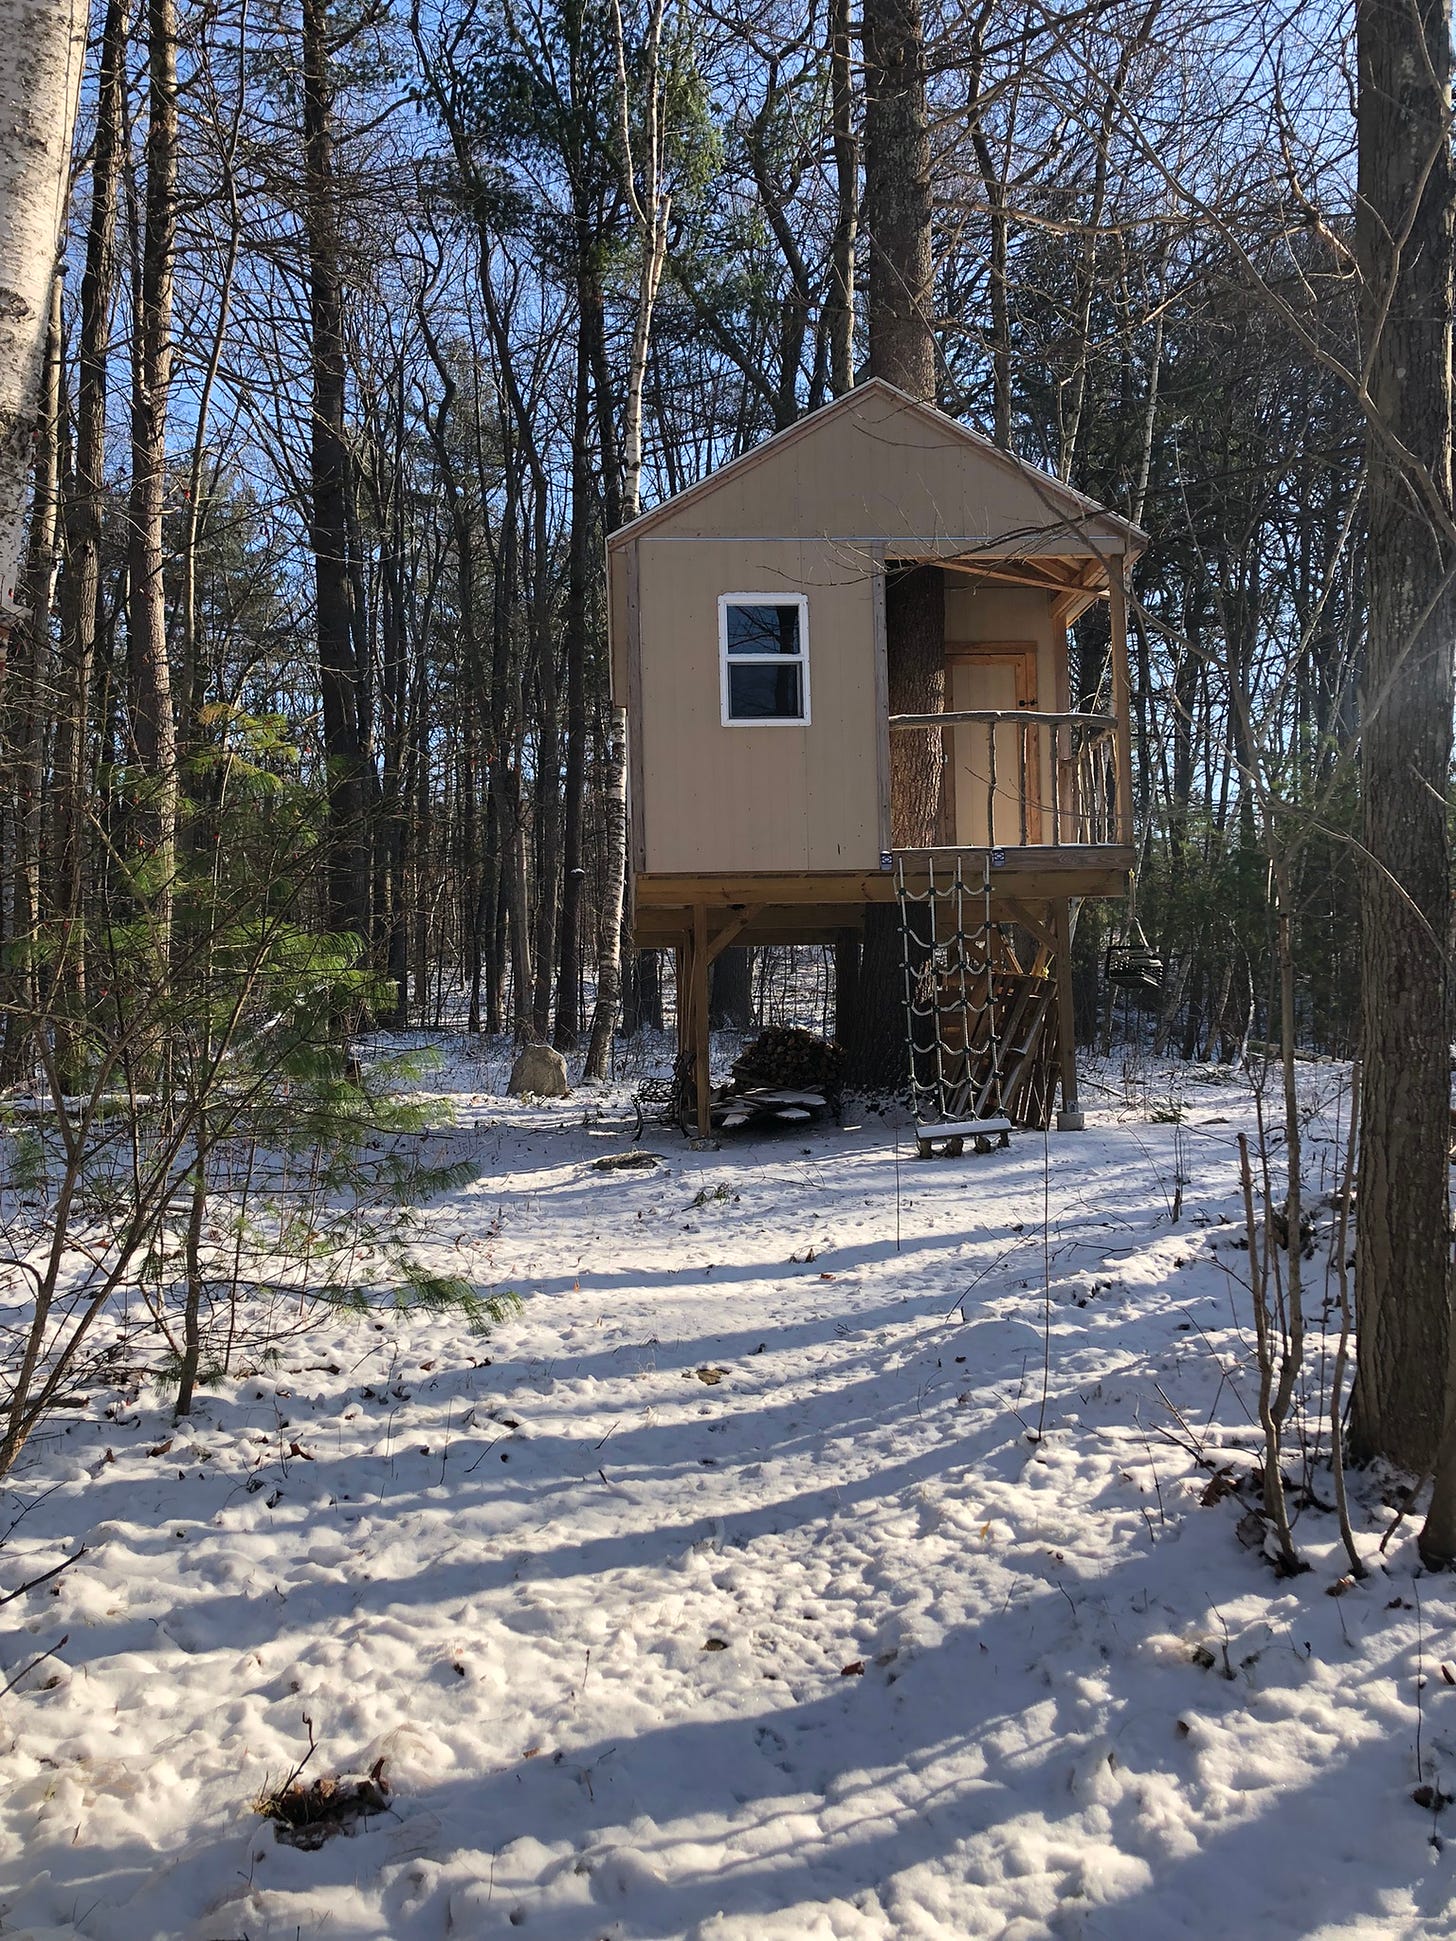 a large treehouse nestled in a snowy wooded area in the daytime